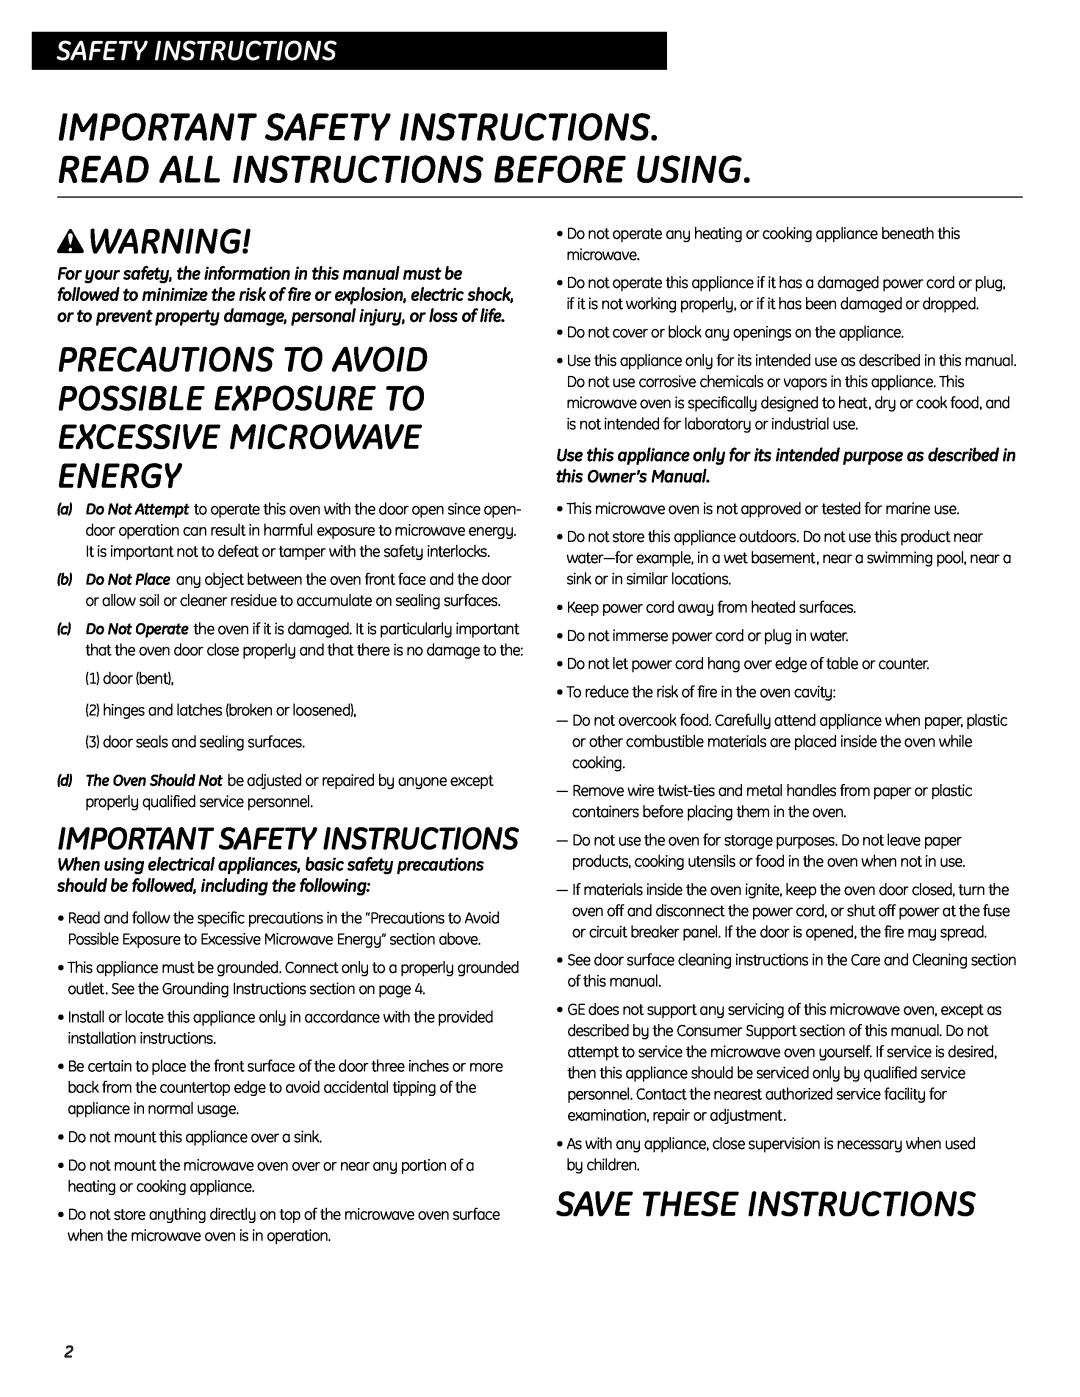 GE JES0734PMRR wWARNING, Save These Instructions, Safetyoperatinginstructions, Important Safety Instructions 